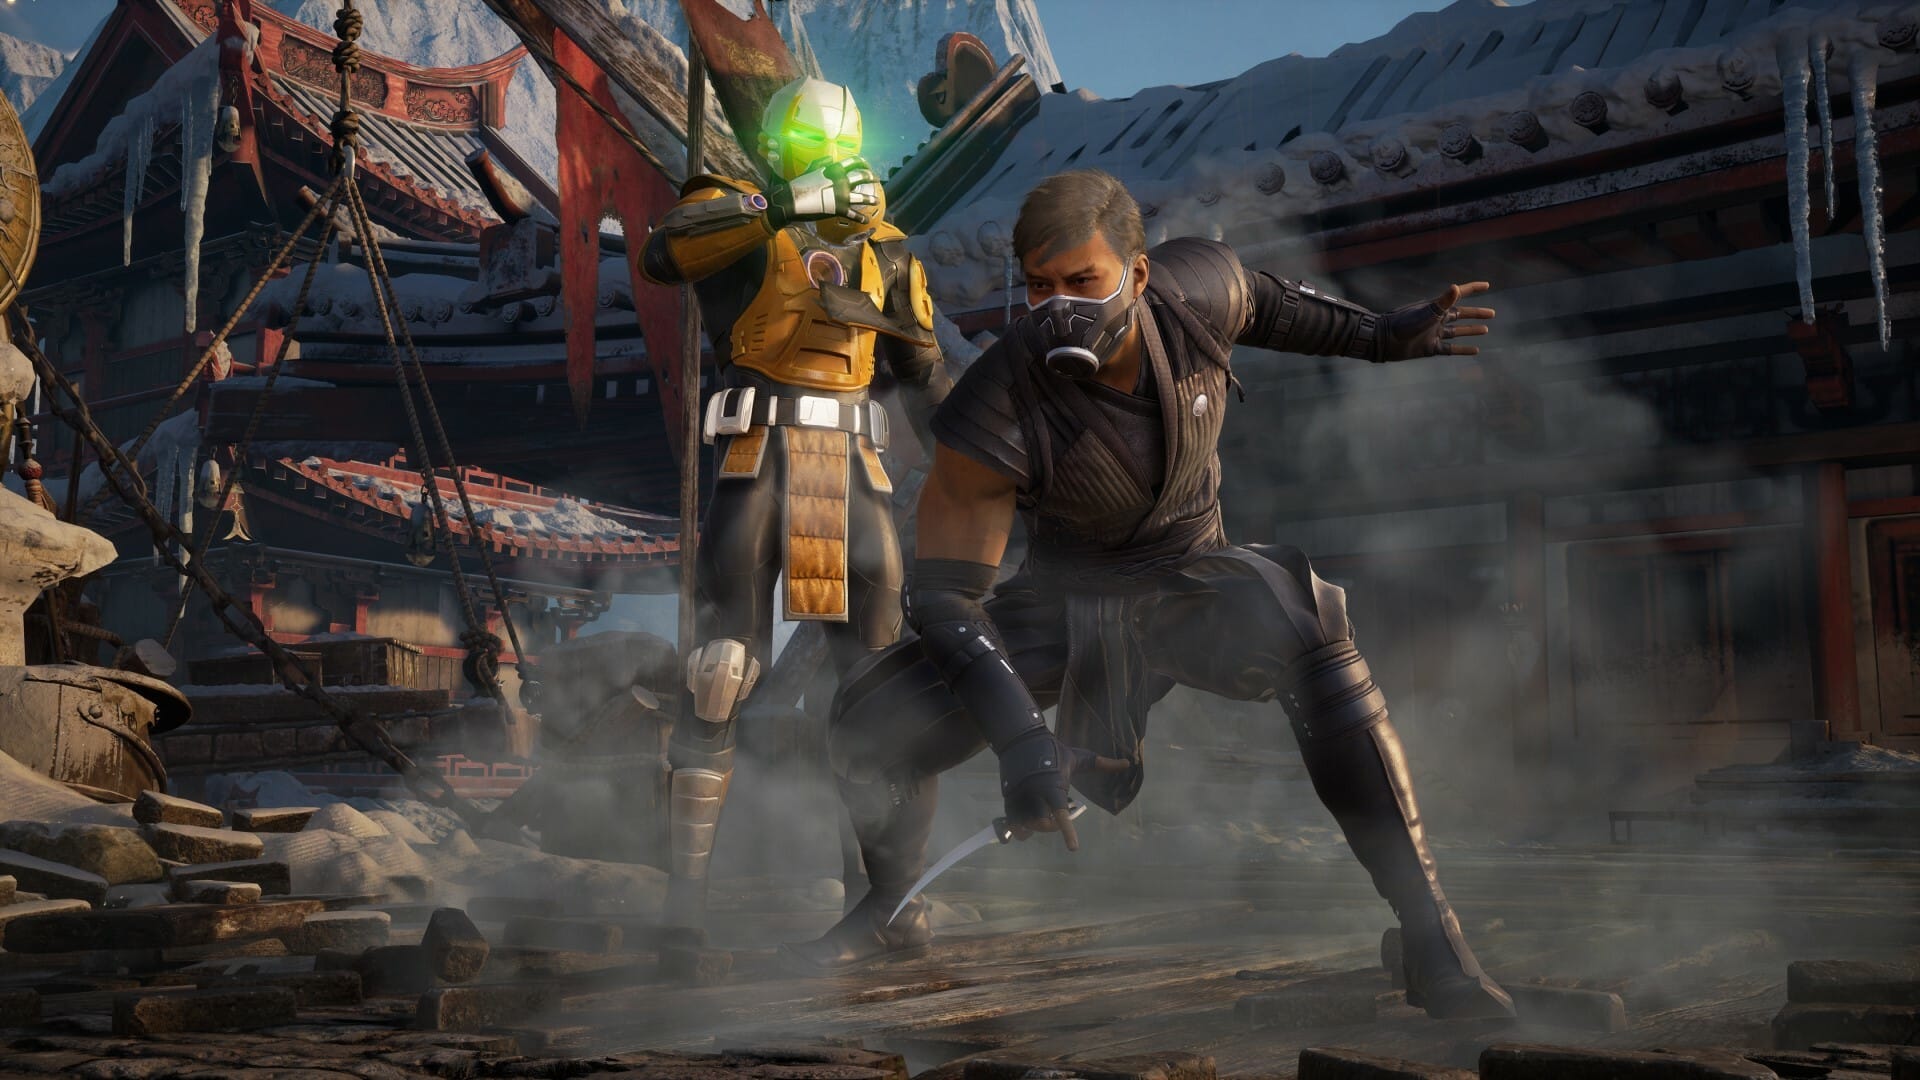 Mortal Kombat 1 Update 1.001 for October 23 Pushed Out, Patch Notes Listed